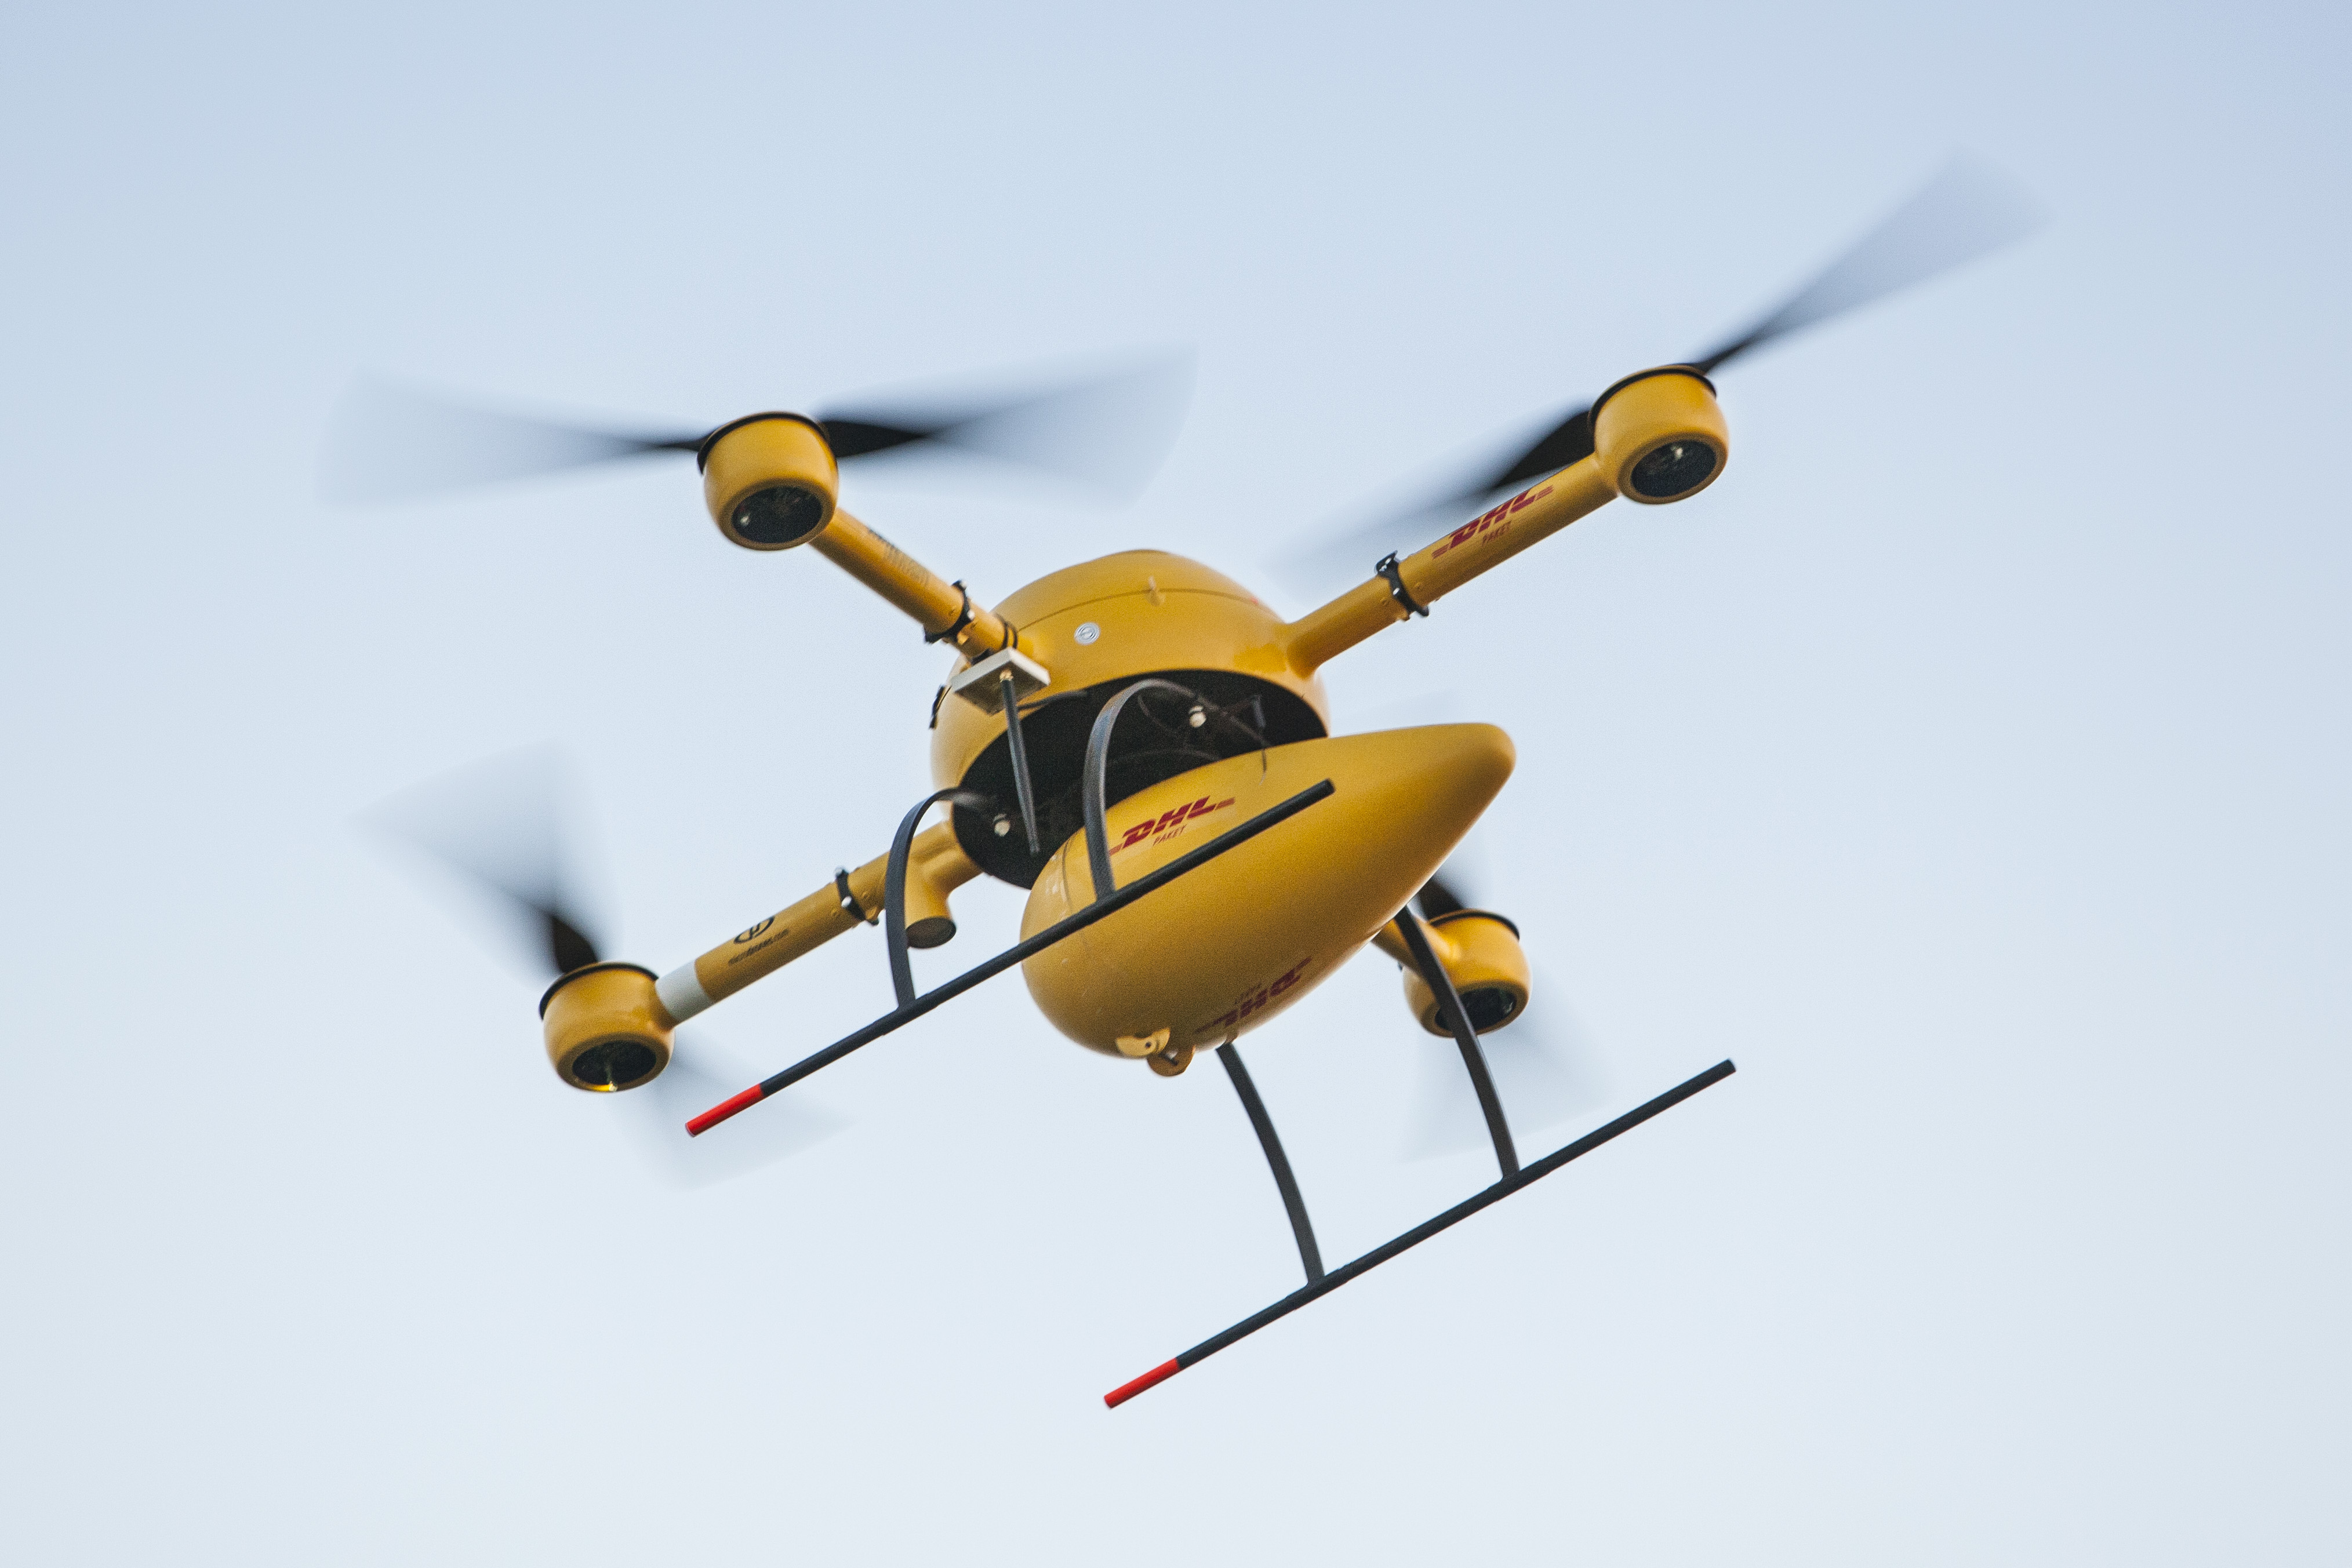 Wal-Mart Planning to Test Delivery Drones